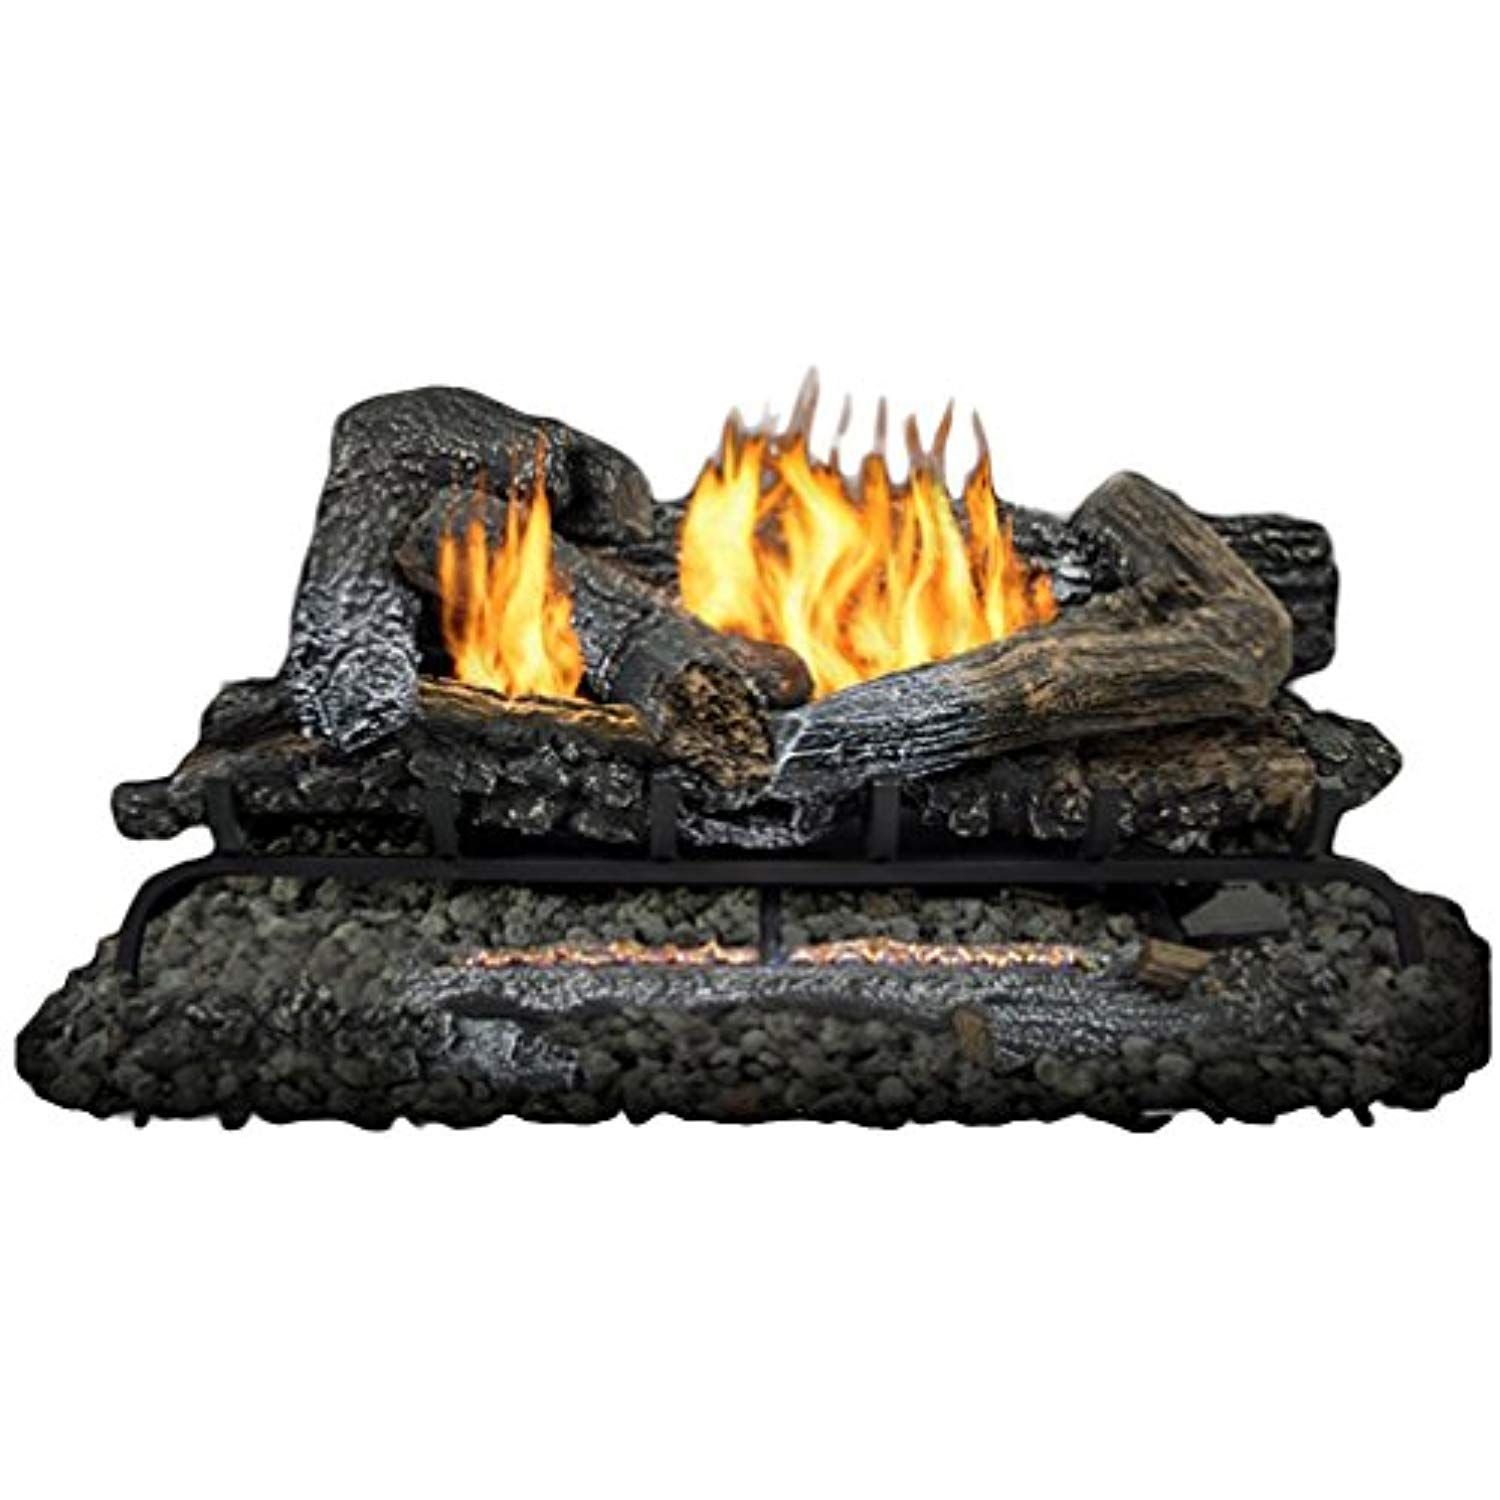 Alpine Gas Fireplaces Inspirational Kozy World Gld3070r Vented Gas Log Set 30" Want to Know